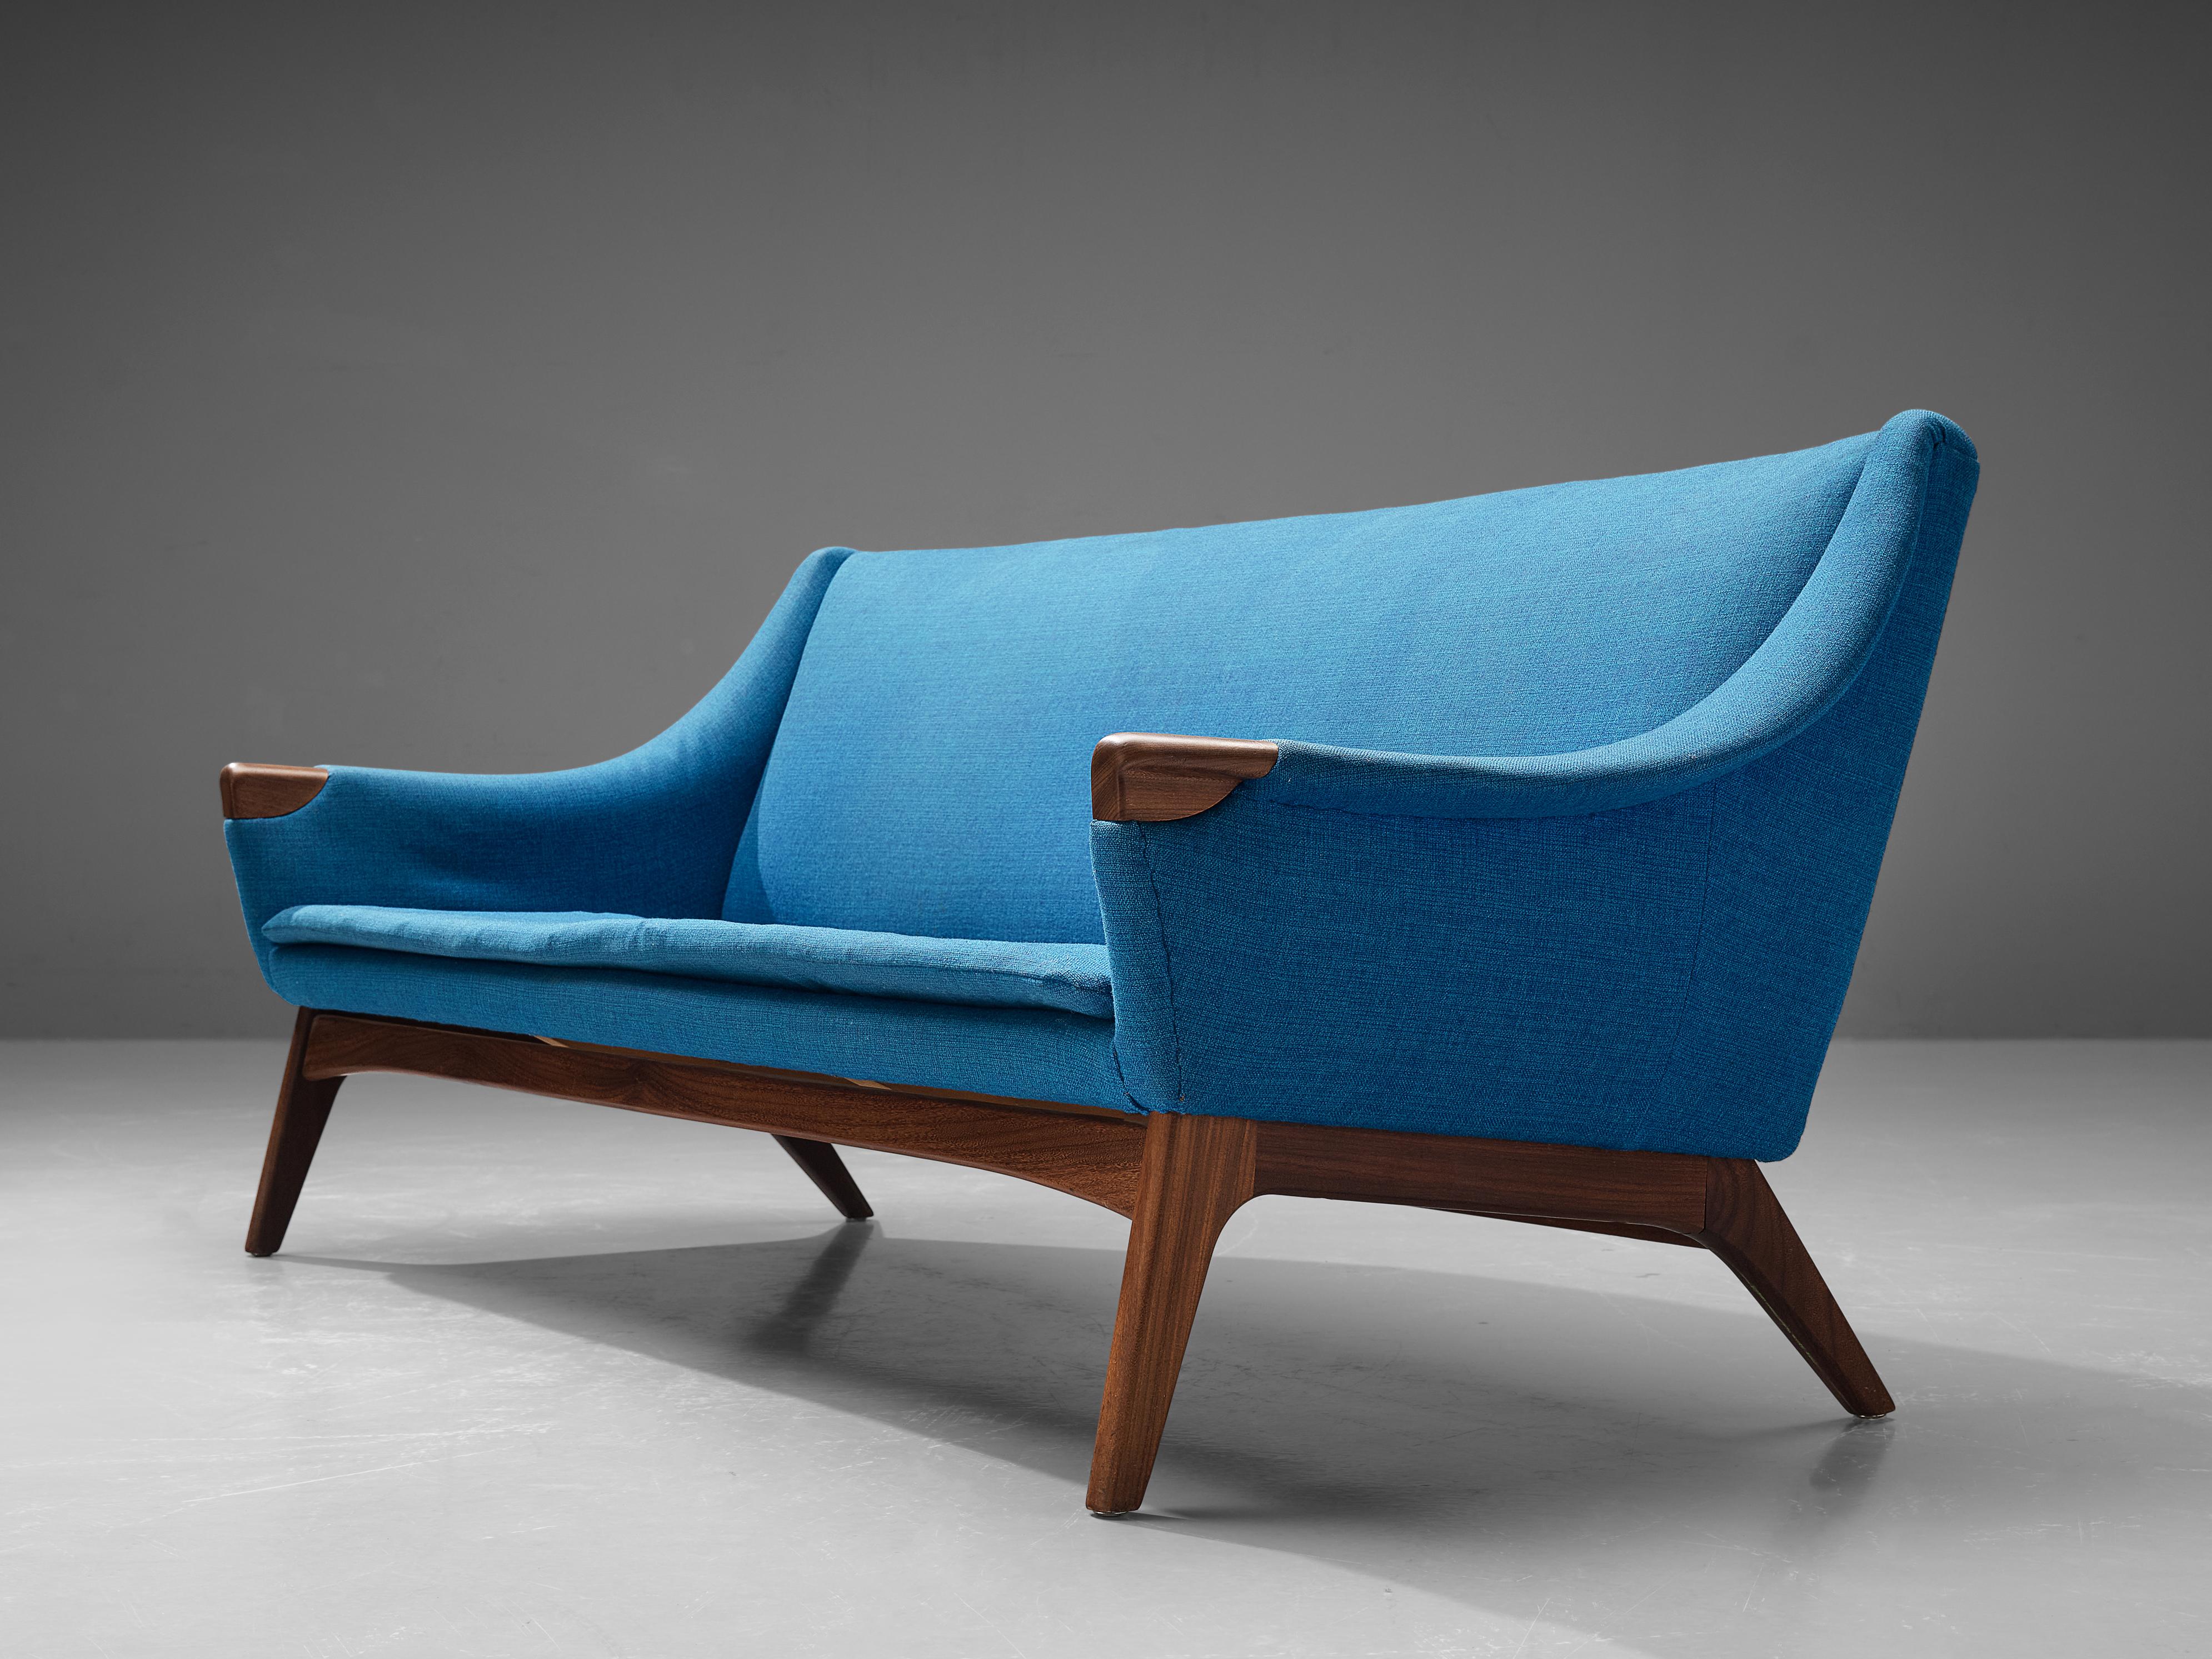 Danish sofa, teak, fabric, Denmark, 1960s 
 
This three seater sofa features a refined blue fabric upholstery and the elegantly executed tapered legs are made out of teak. A remarkable detail are the revealing teak ends of the armrests, creating a